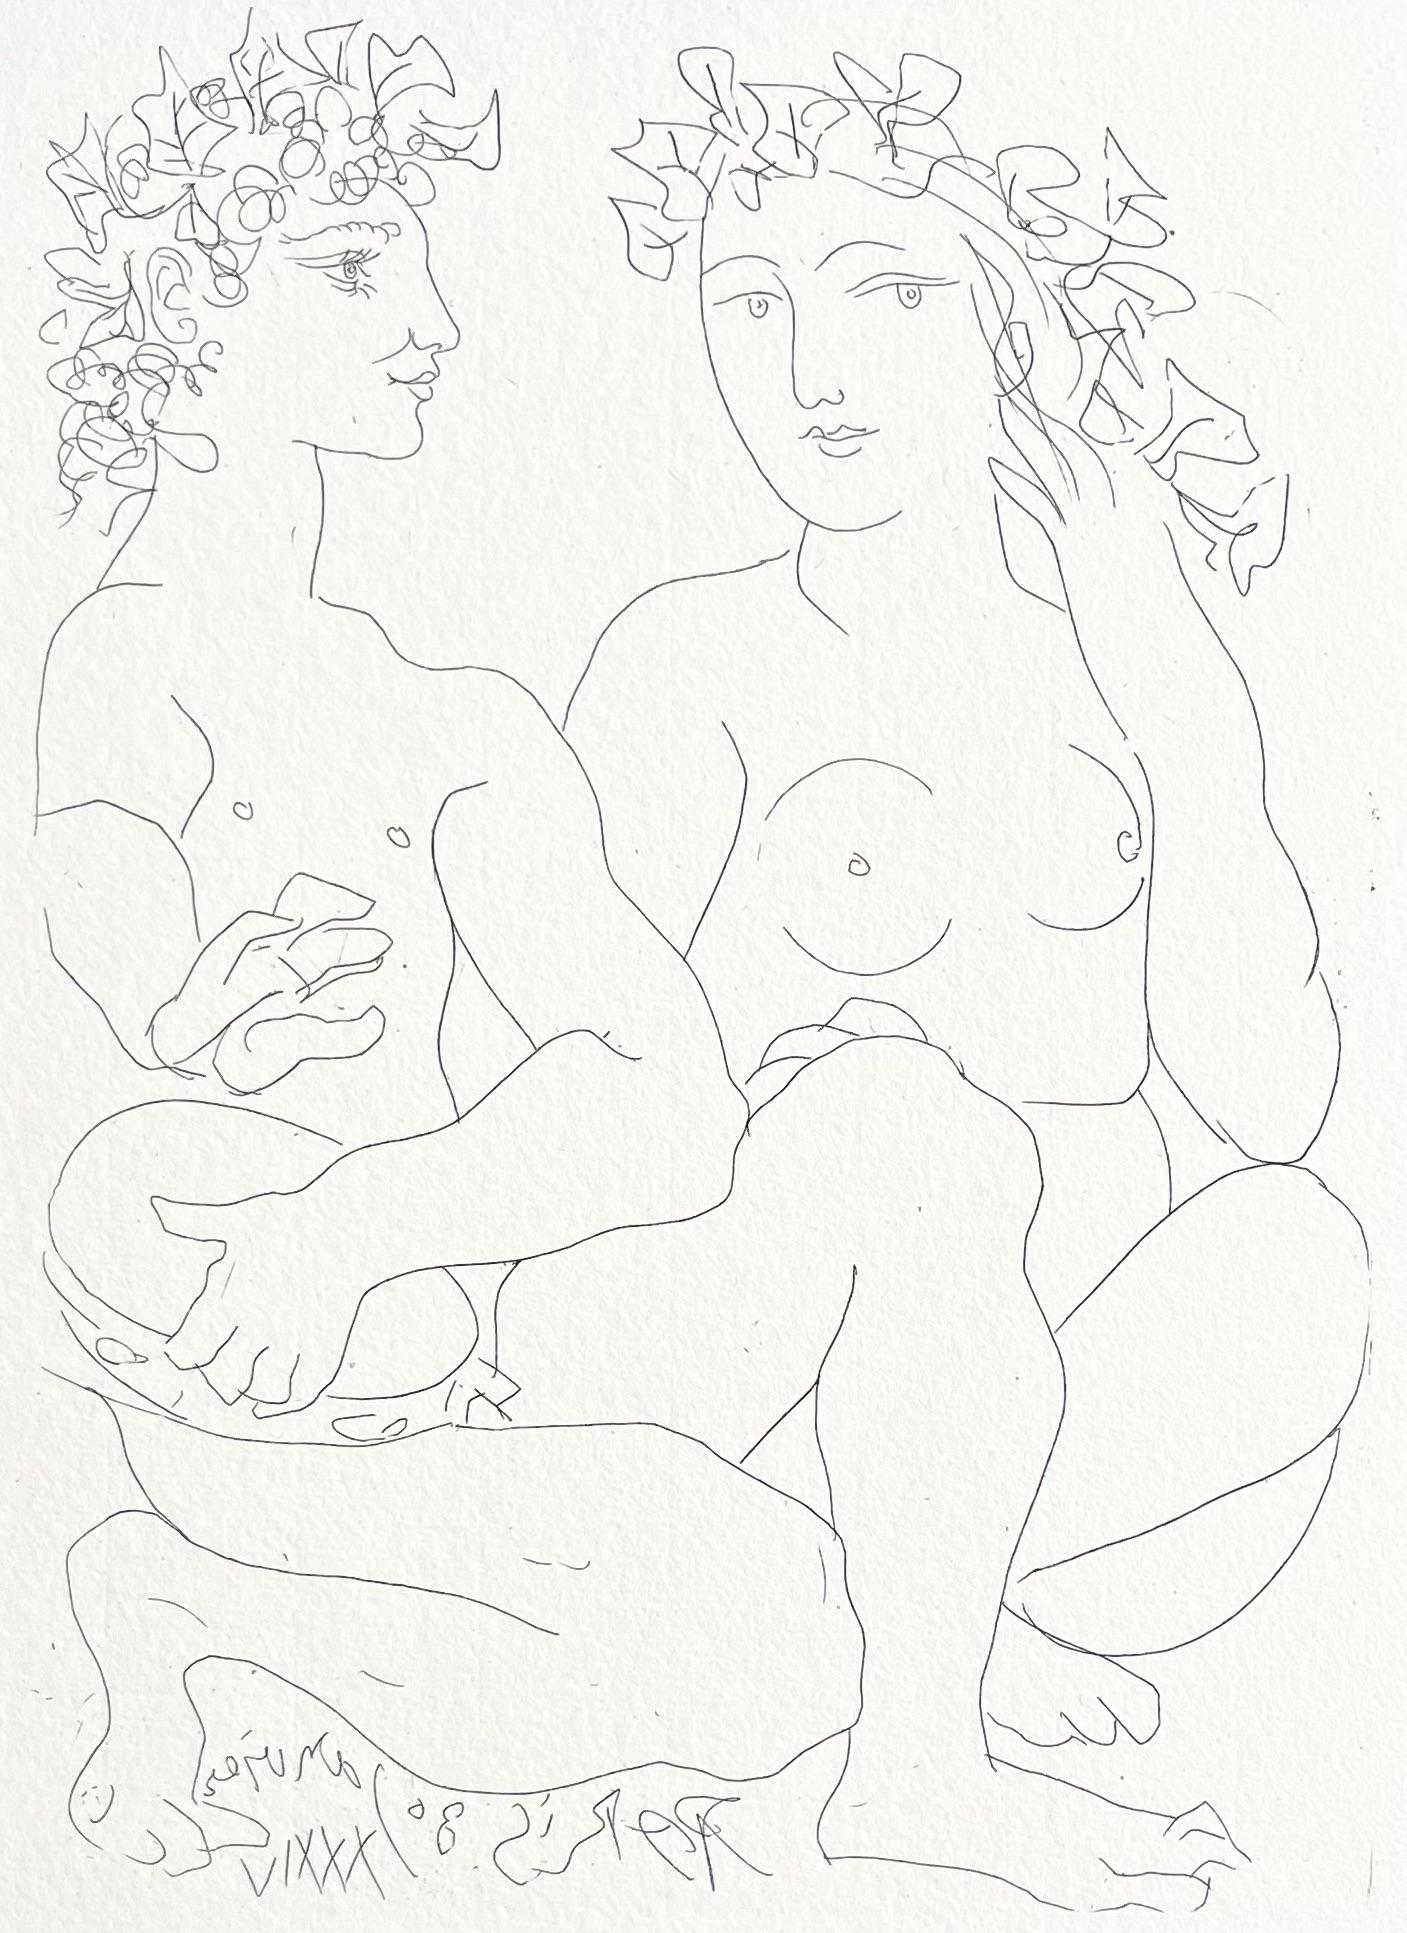 Pablo Picasso Nude Print - Picasso, two artworks (after)